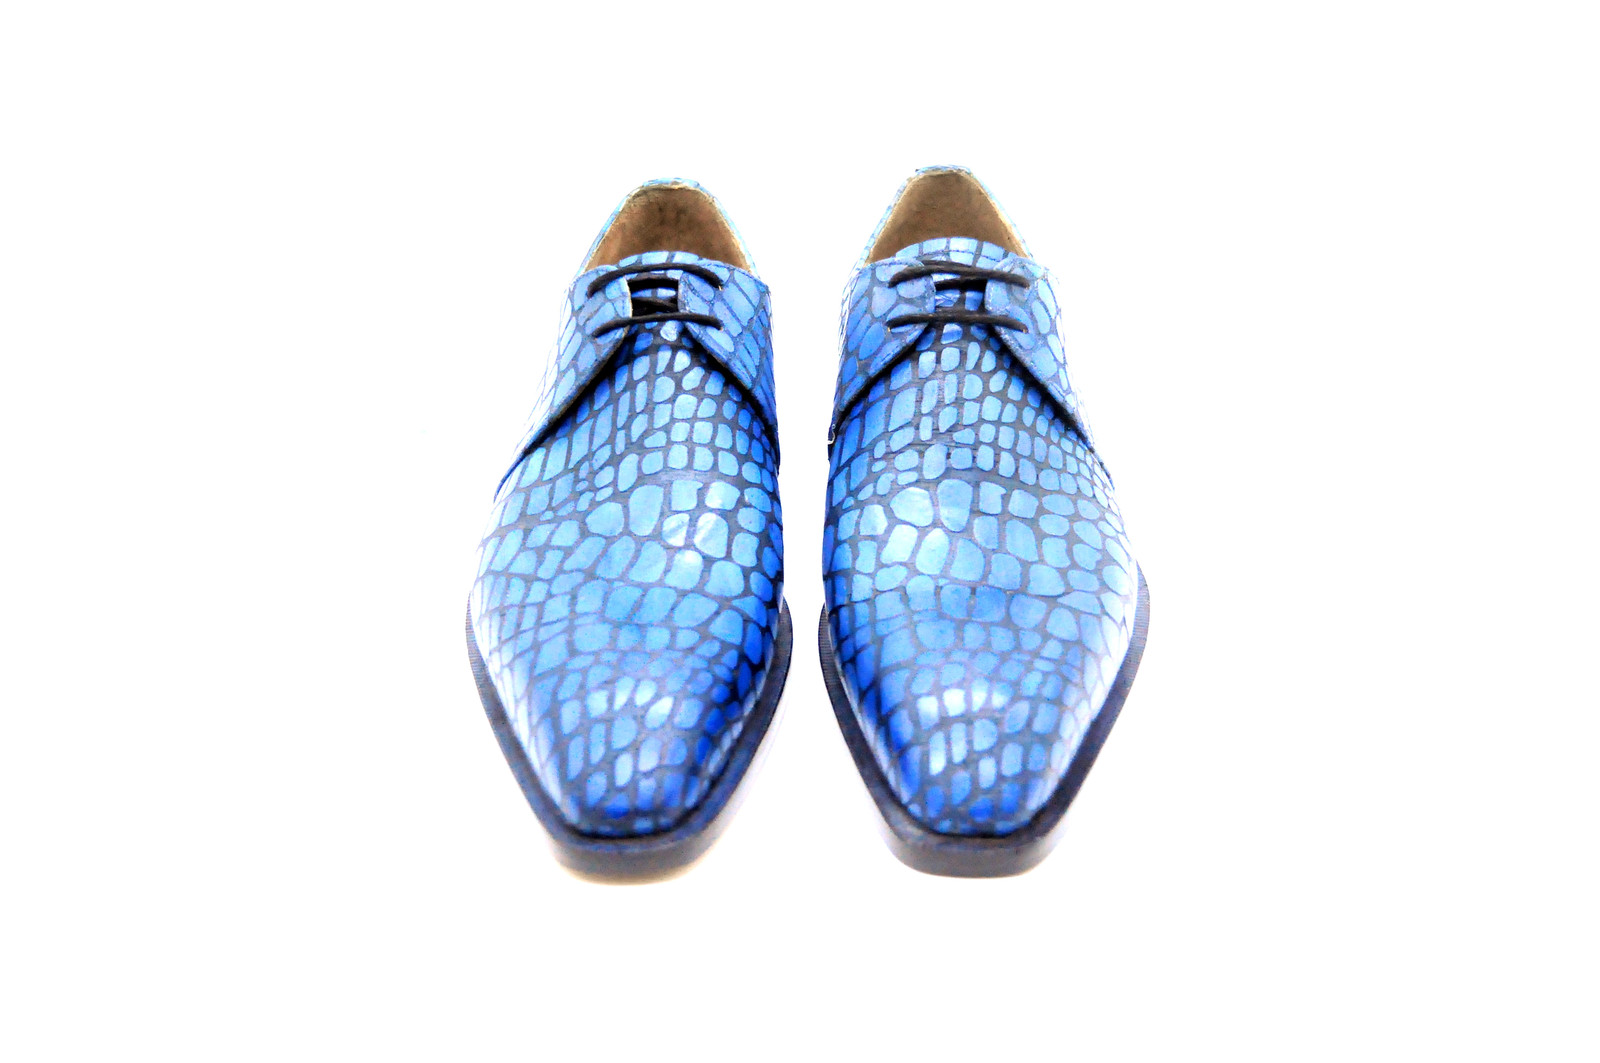 Handmade Men's Blue Leather Dress Formal Custom Made Leather Oxfords Shoes